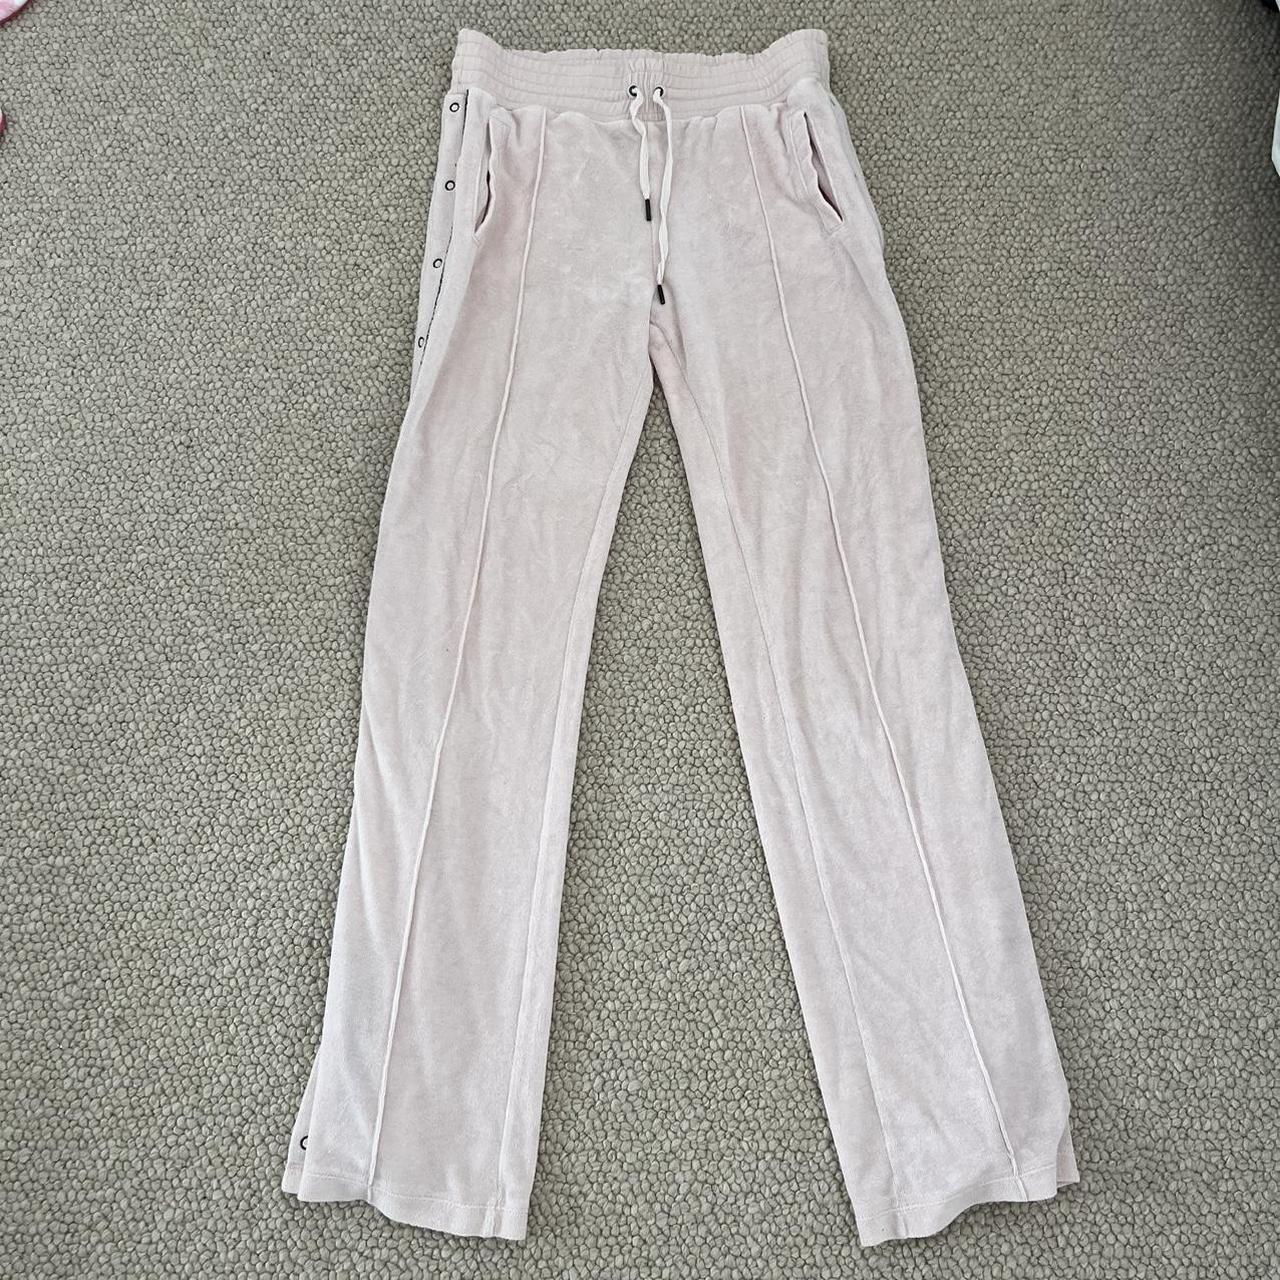 Sugarfree baby pink terry towelling flare tracksuit... - Depop